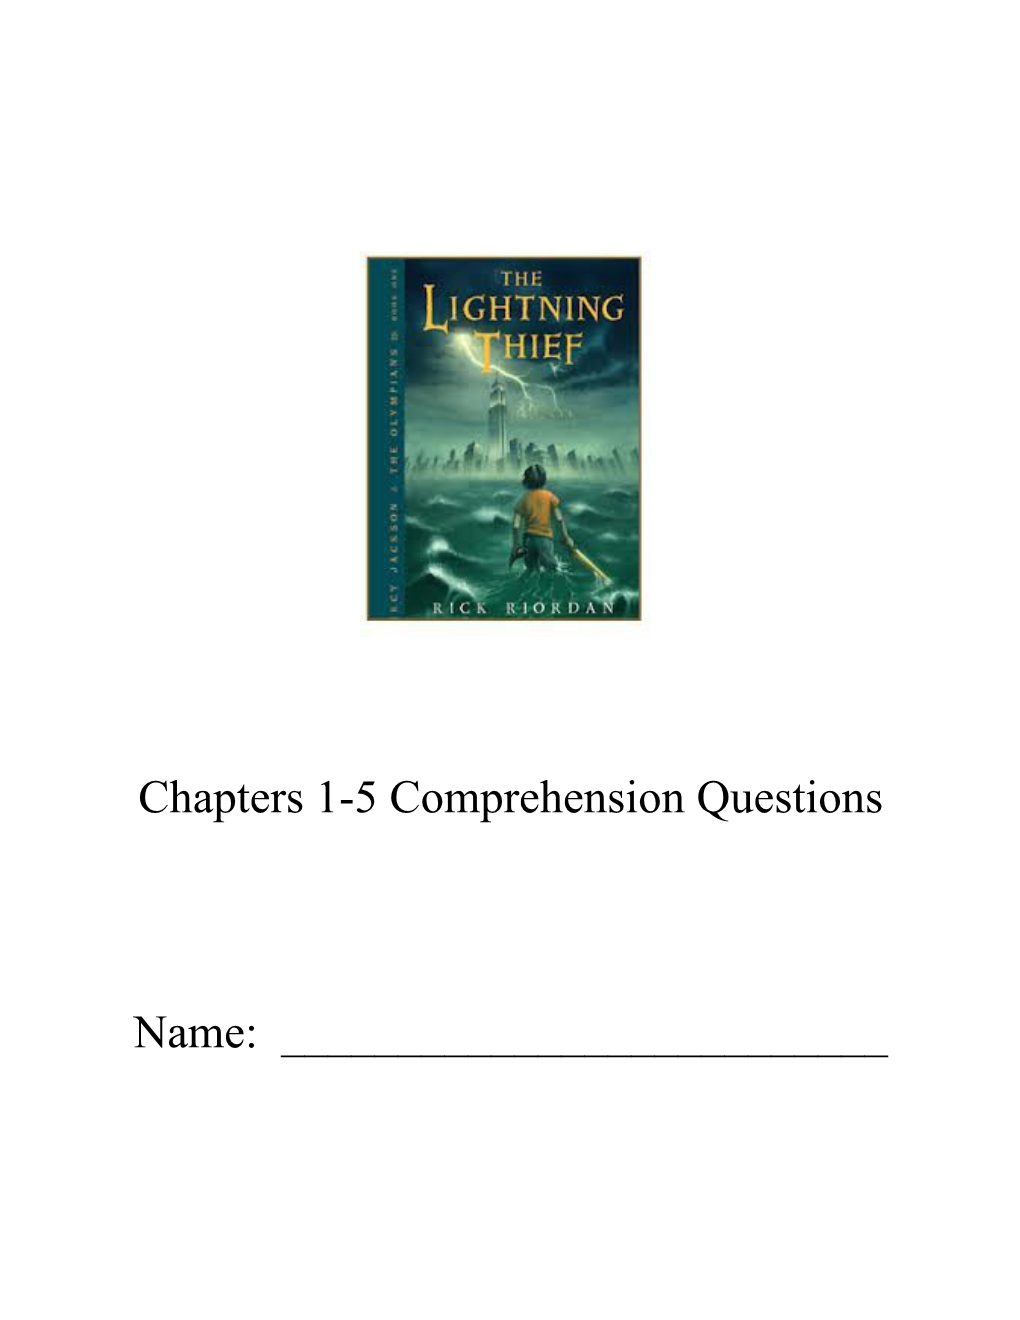 Chapters 1-5 Comprehension Questions